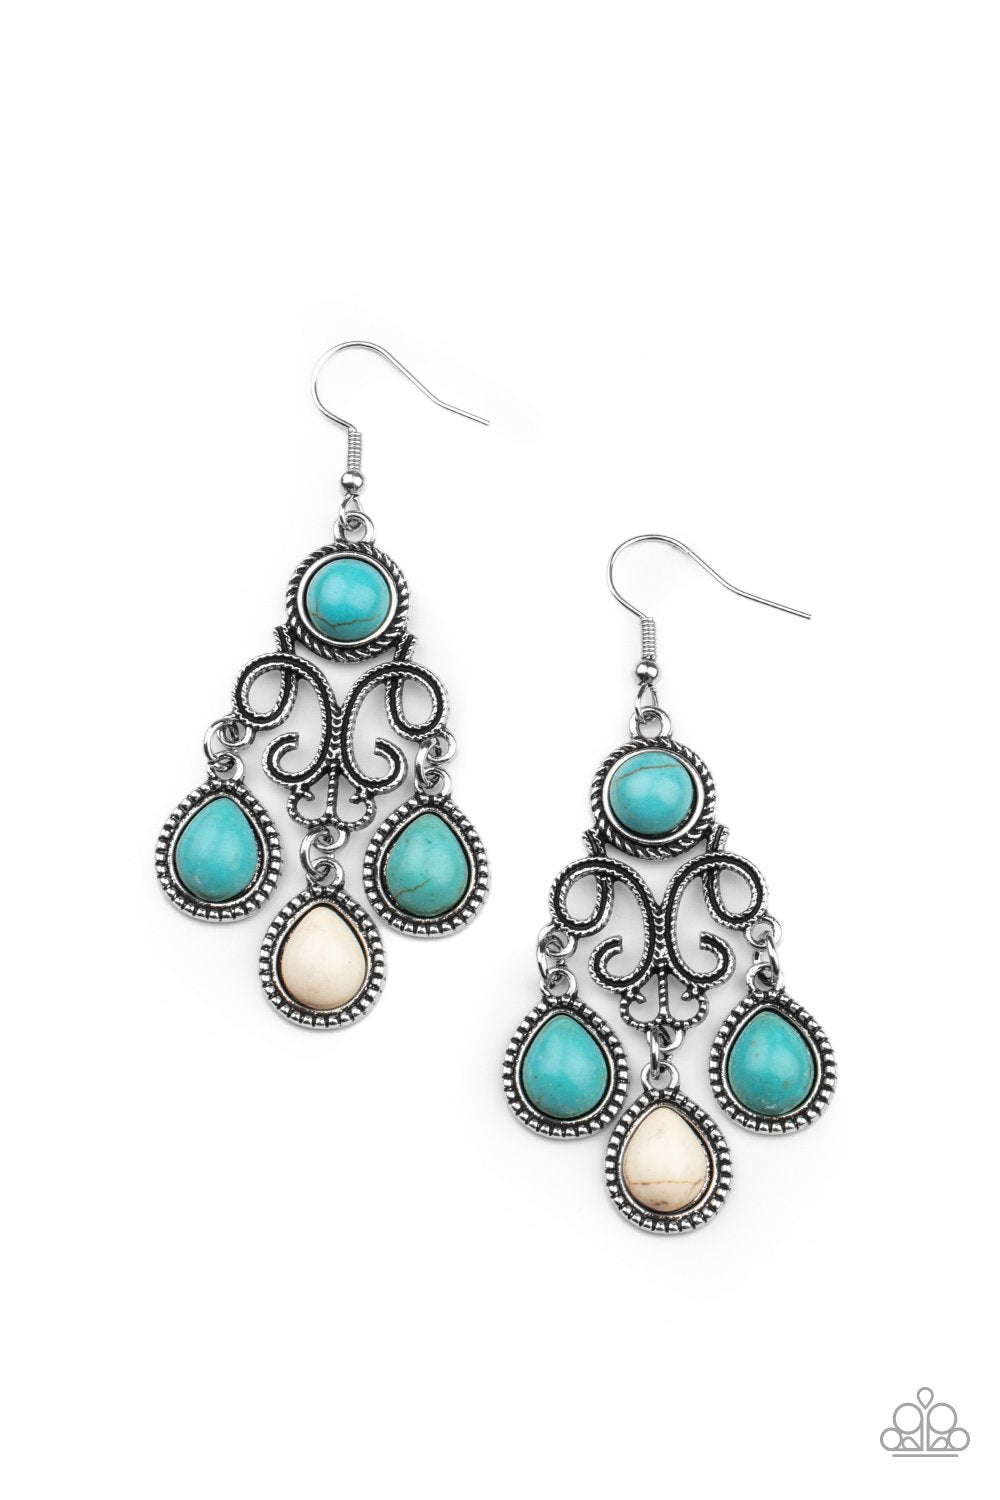 Canyon Chandelier Multi Turquoise Blue and White Stone Earrings - Paparazzi Accessories- lightbox - CarasShop.com - $5 Jewelry by Cara Jewels